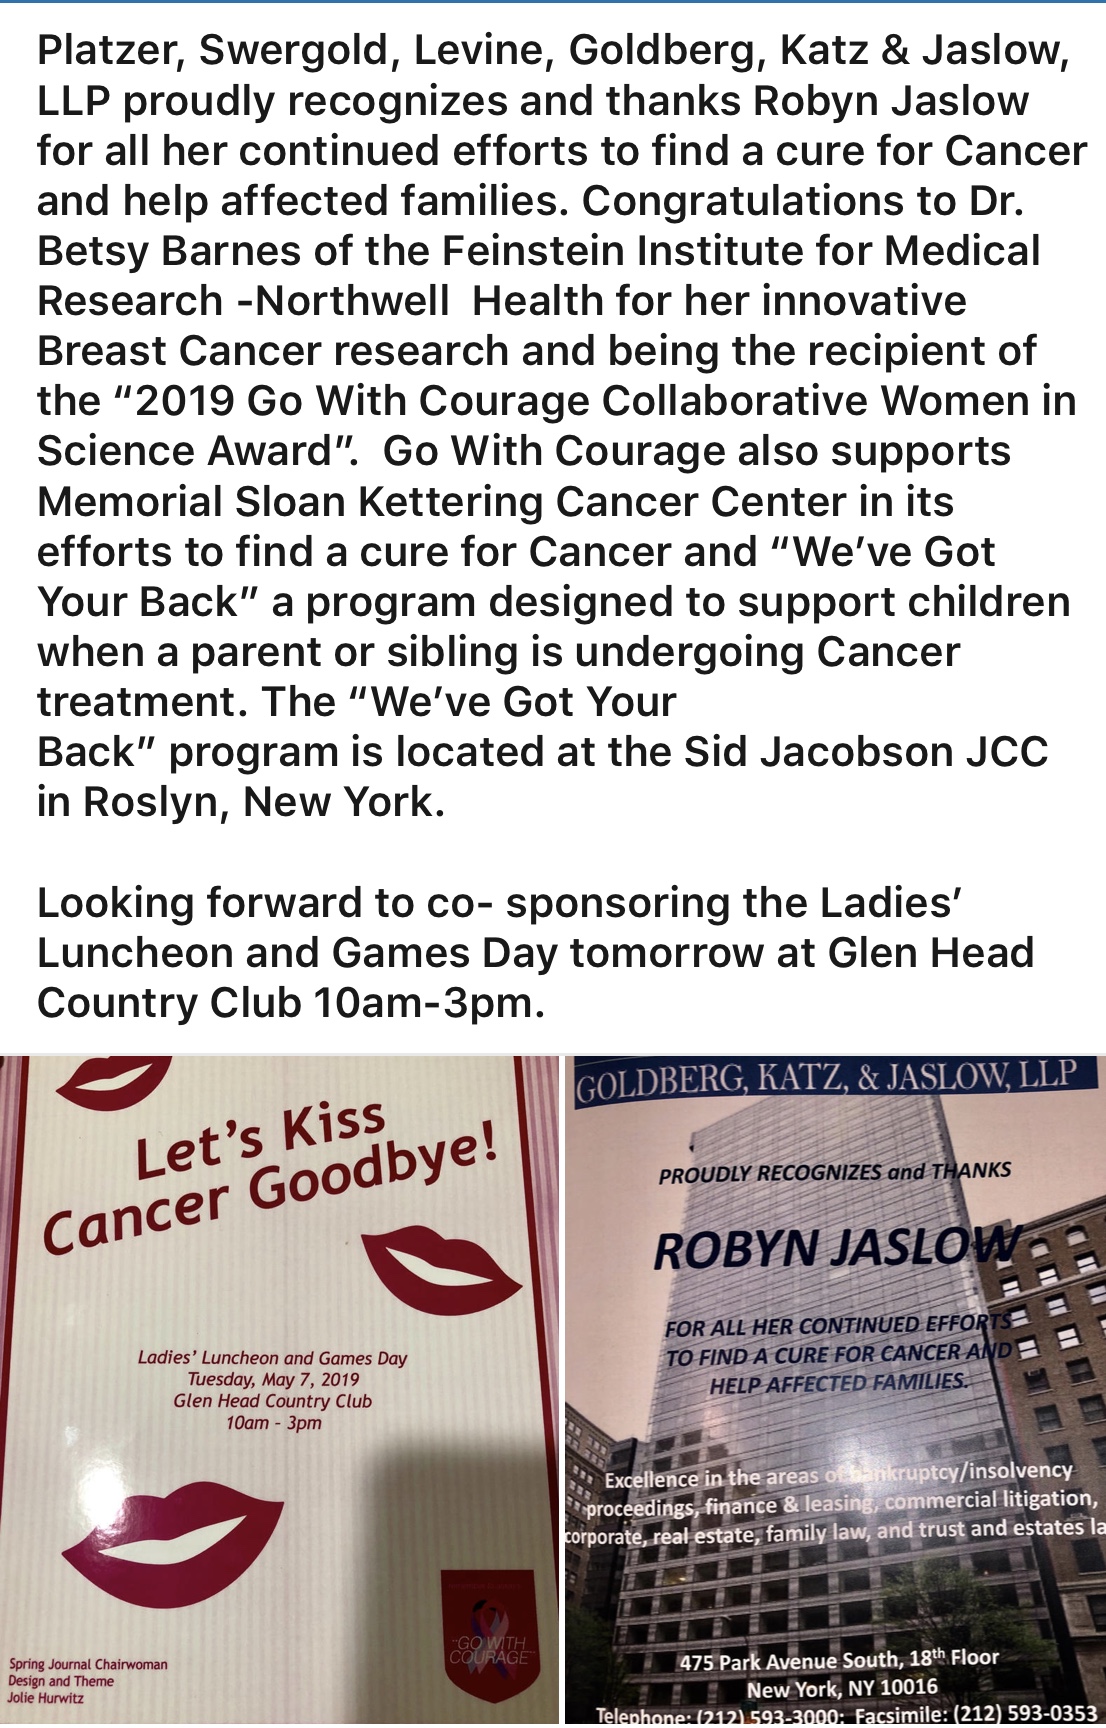 Robyn Jaslow recognized for continued efforts to find a cure for Cancer and help afflicted families